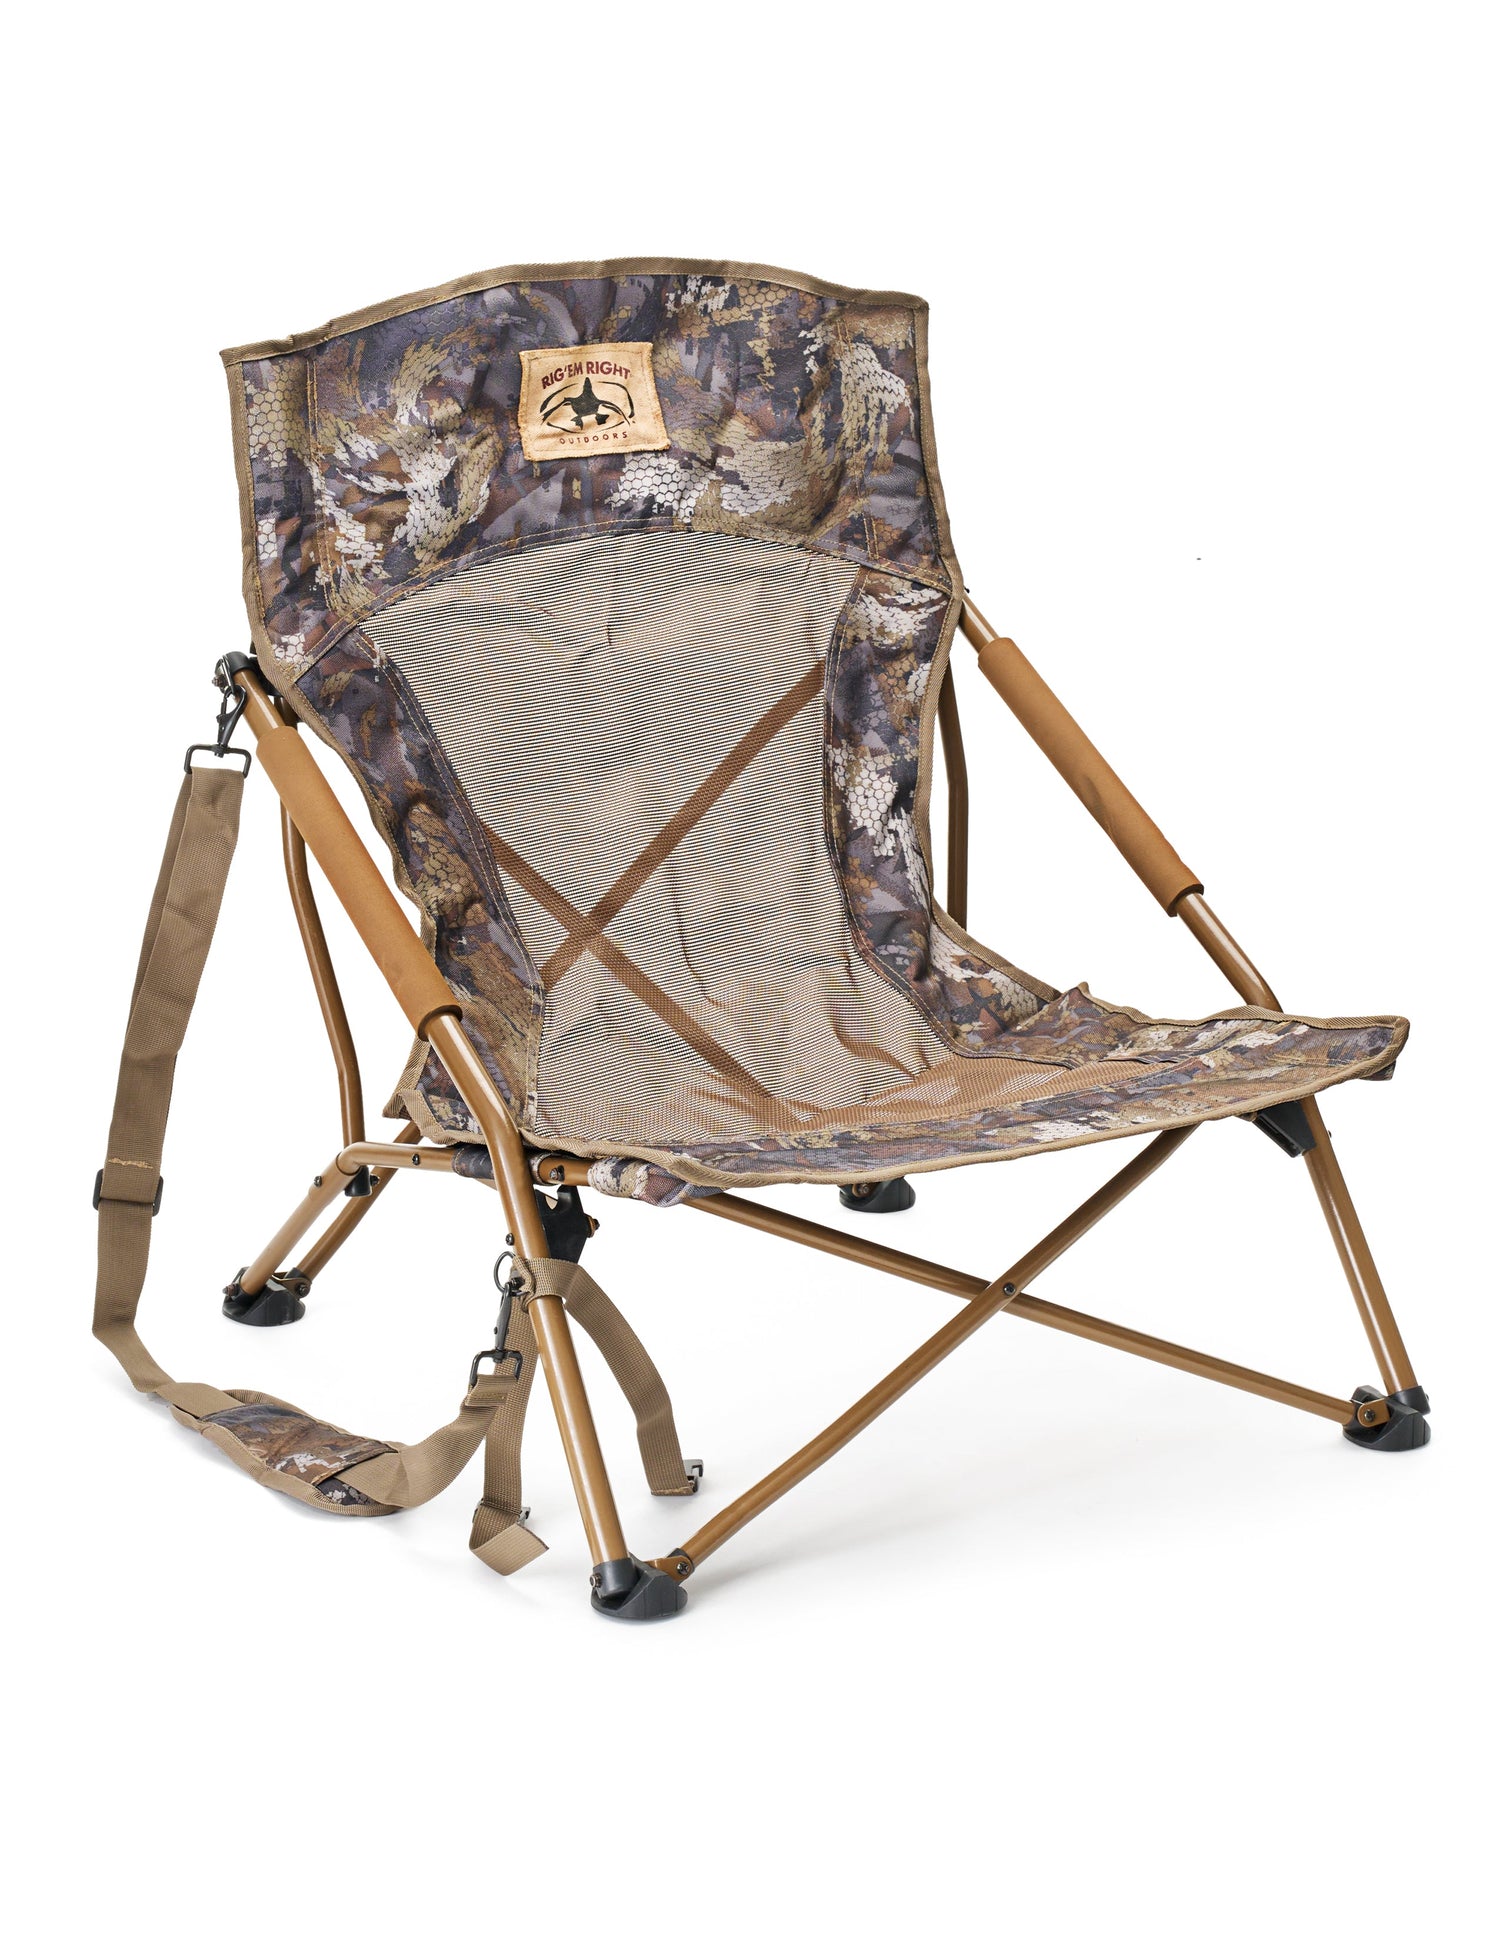 Rig'Em Right The GO Seat in  by GOHUNT | Rig'Em Right - GOHUNT Shop